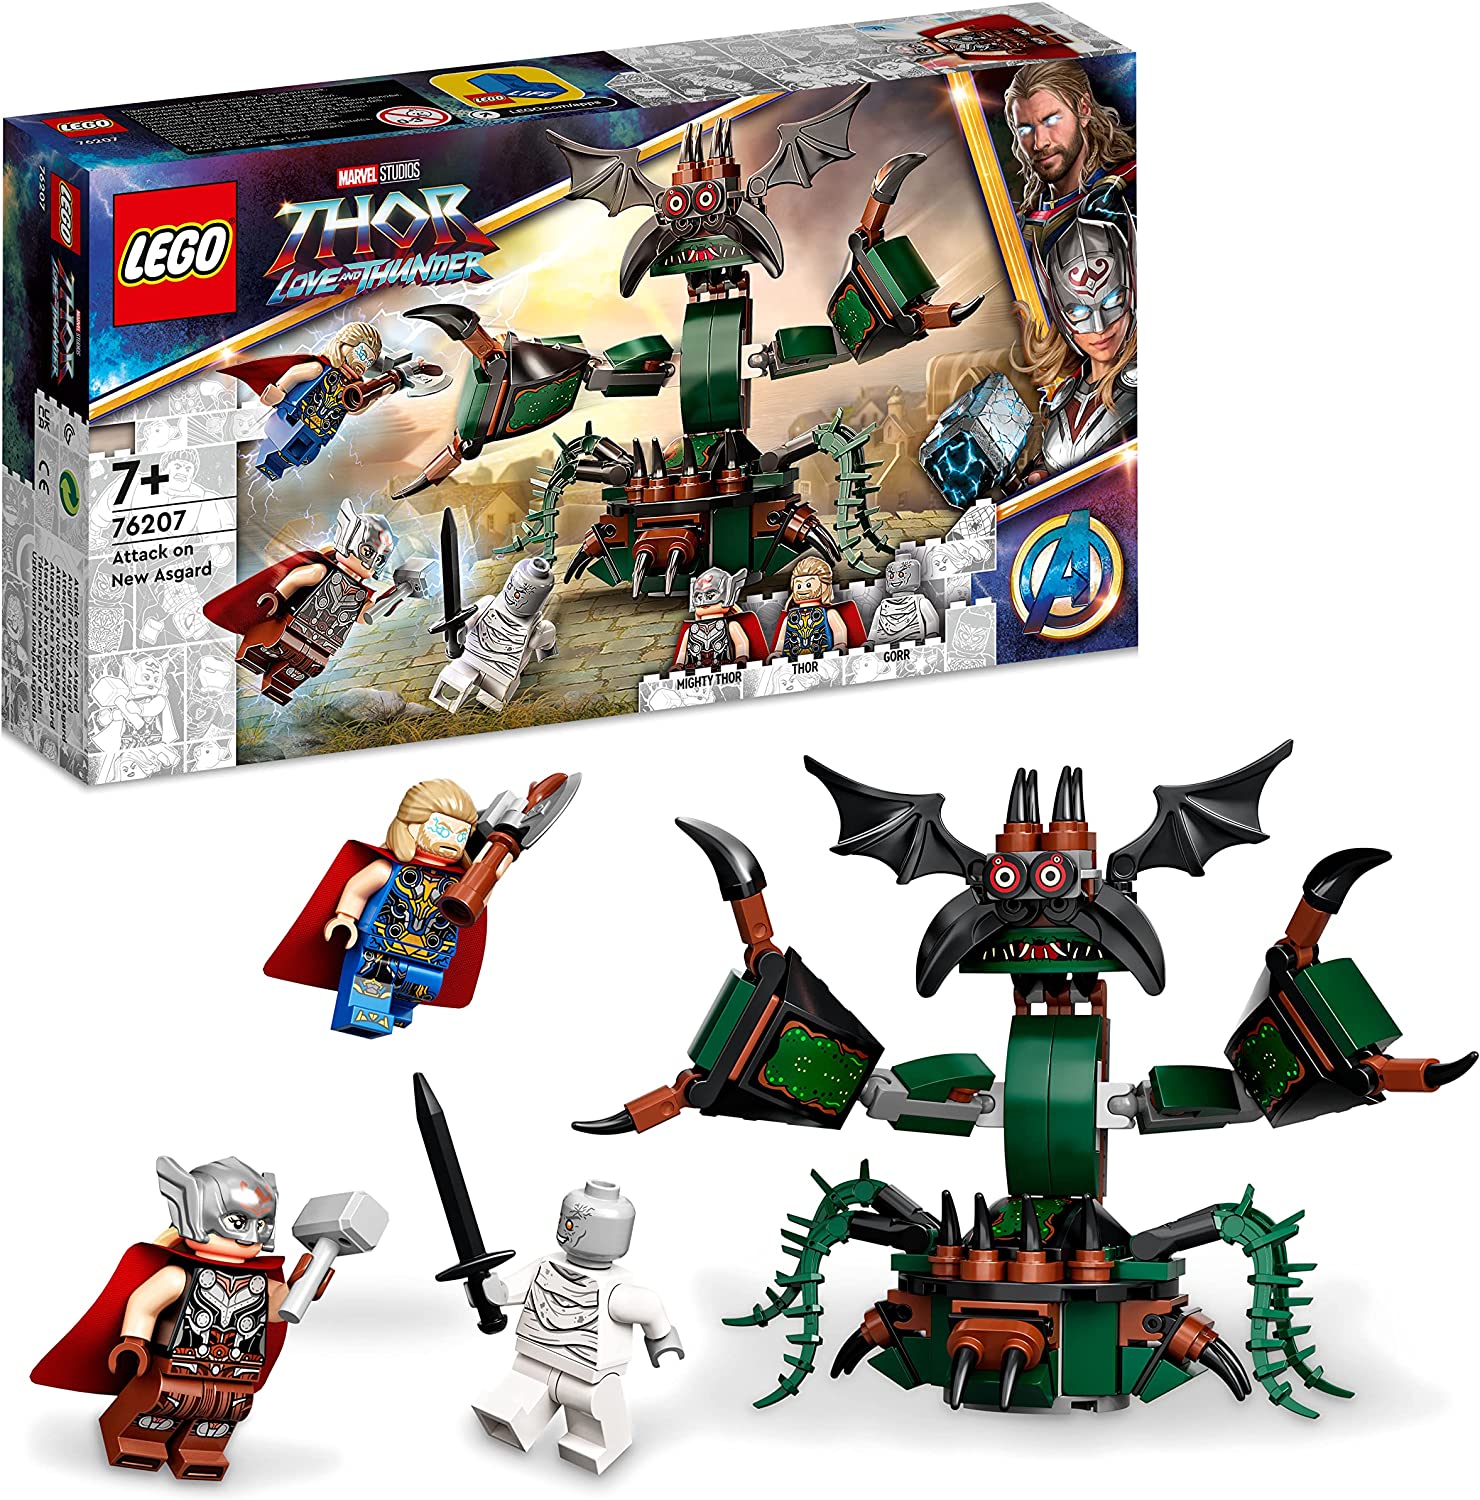 LEGO 76207 Marvel Attack on New Asgard, Monster and 3 Mini Figures with Stormbreaker and Hammer, Avengers Toy from Thor: Love & Thunder